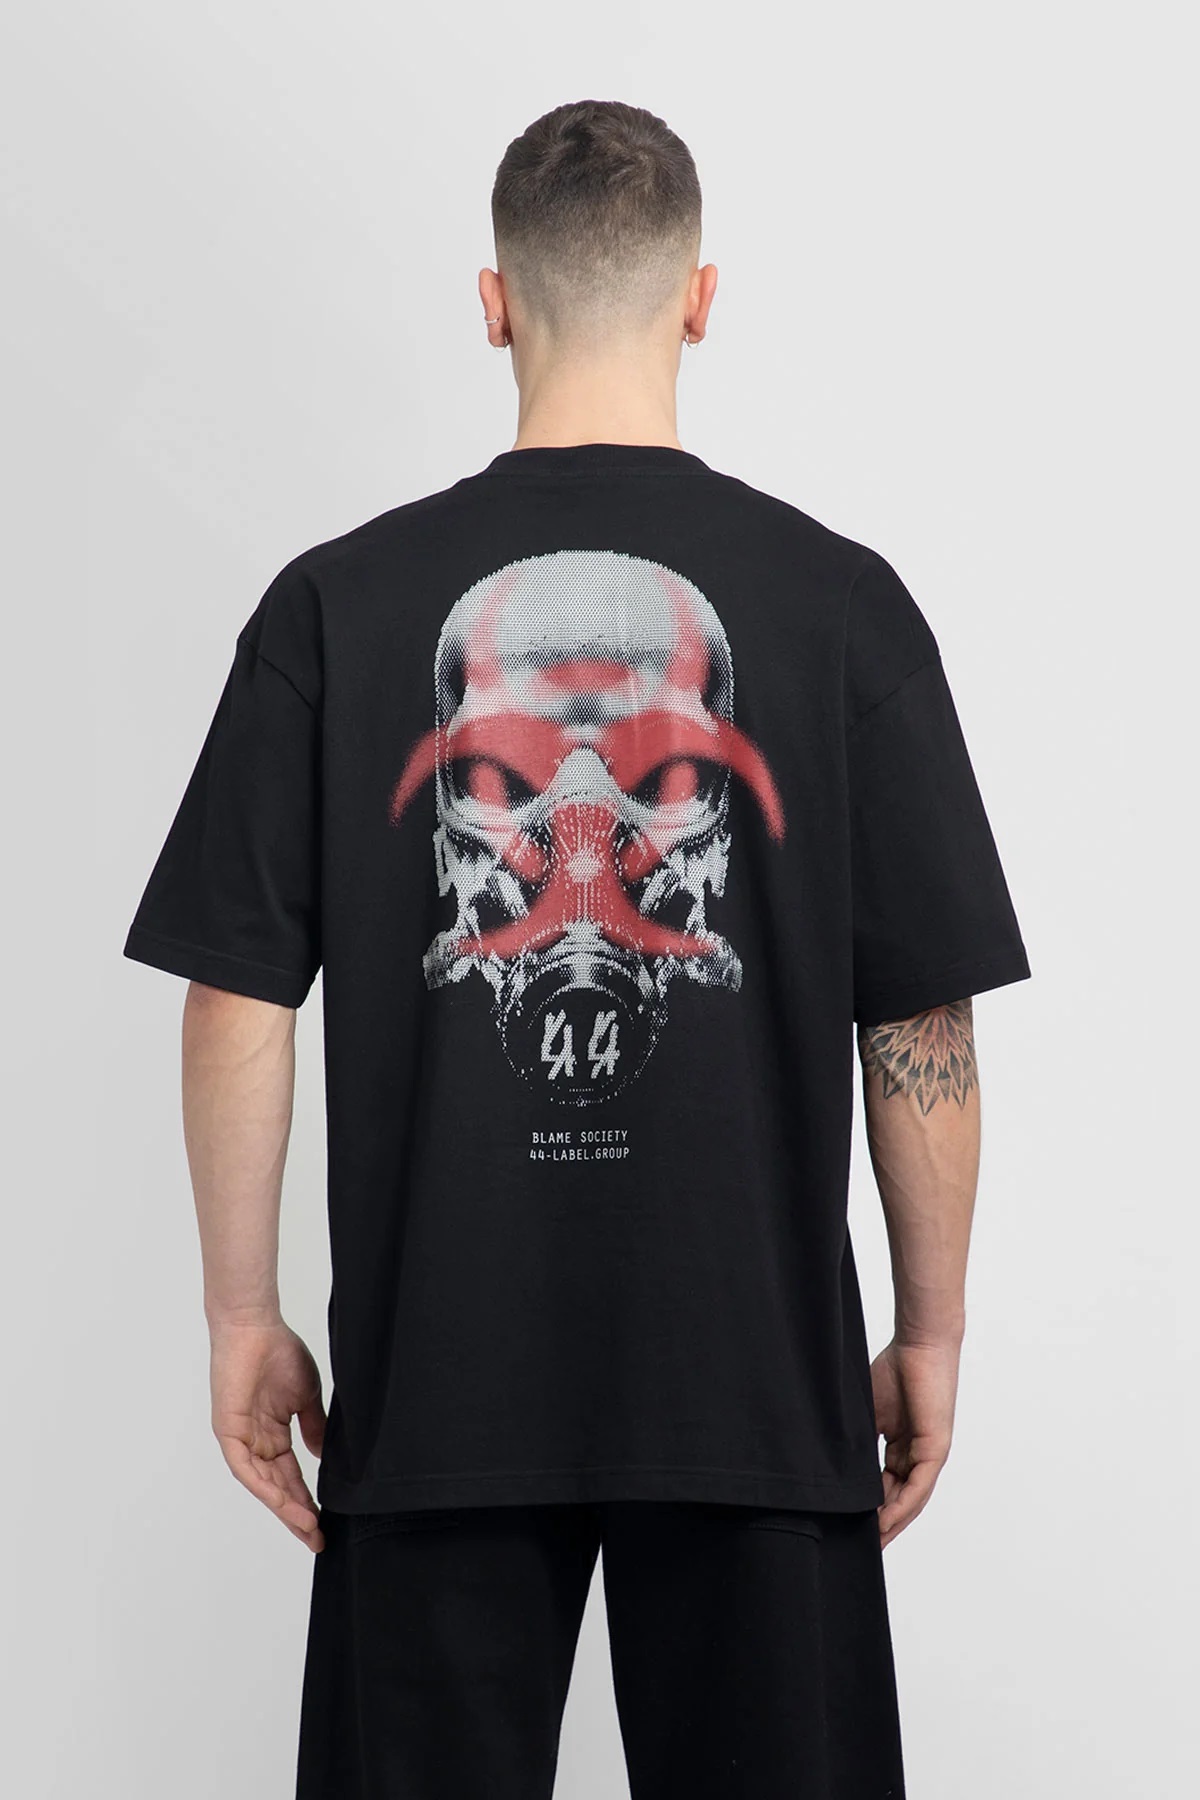 44 LABEL GROUP Fallout T-Shirt in Black S